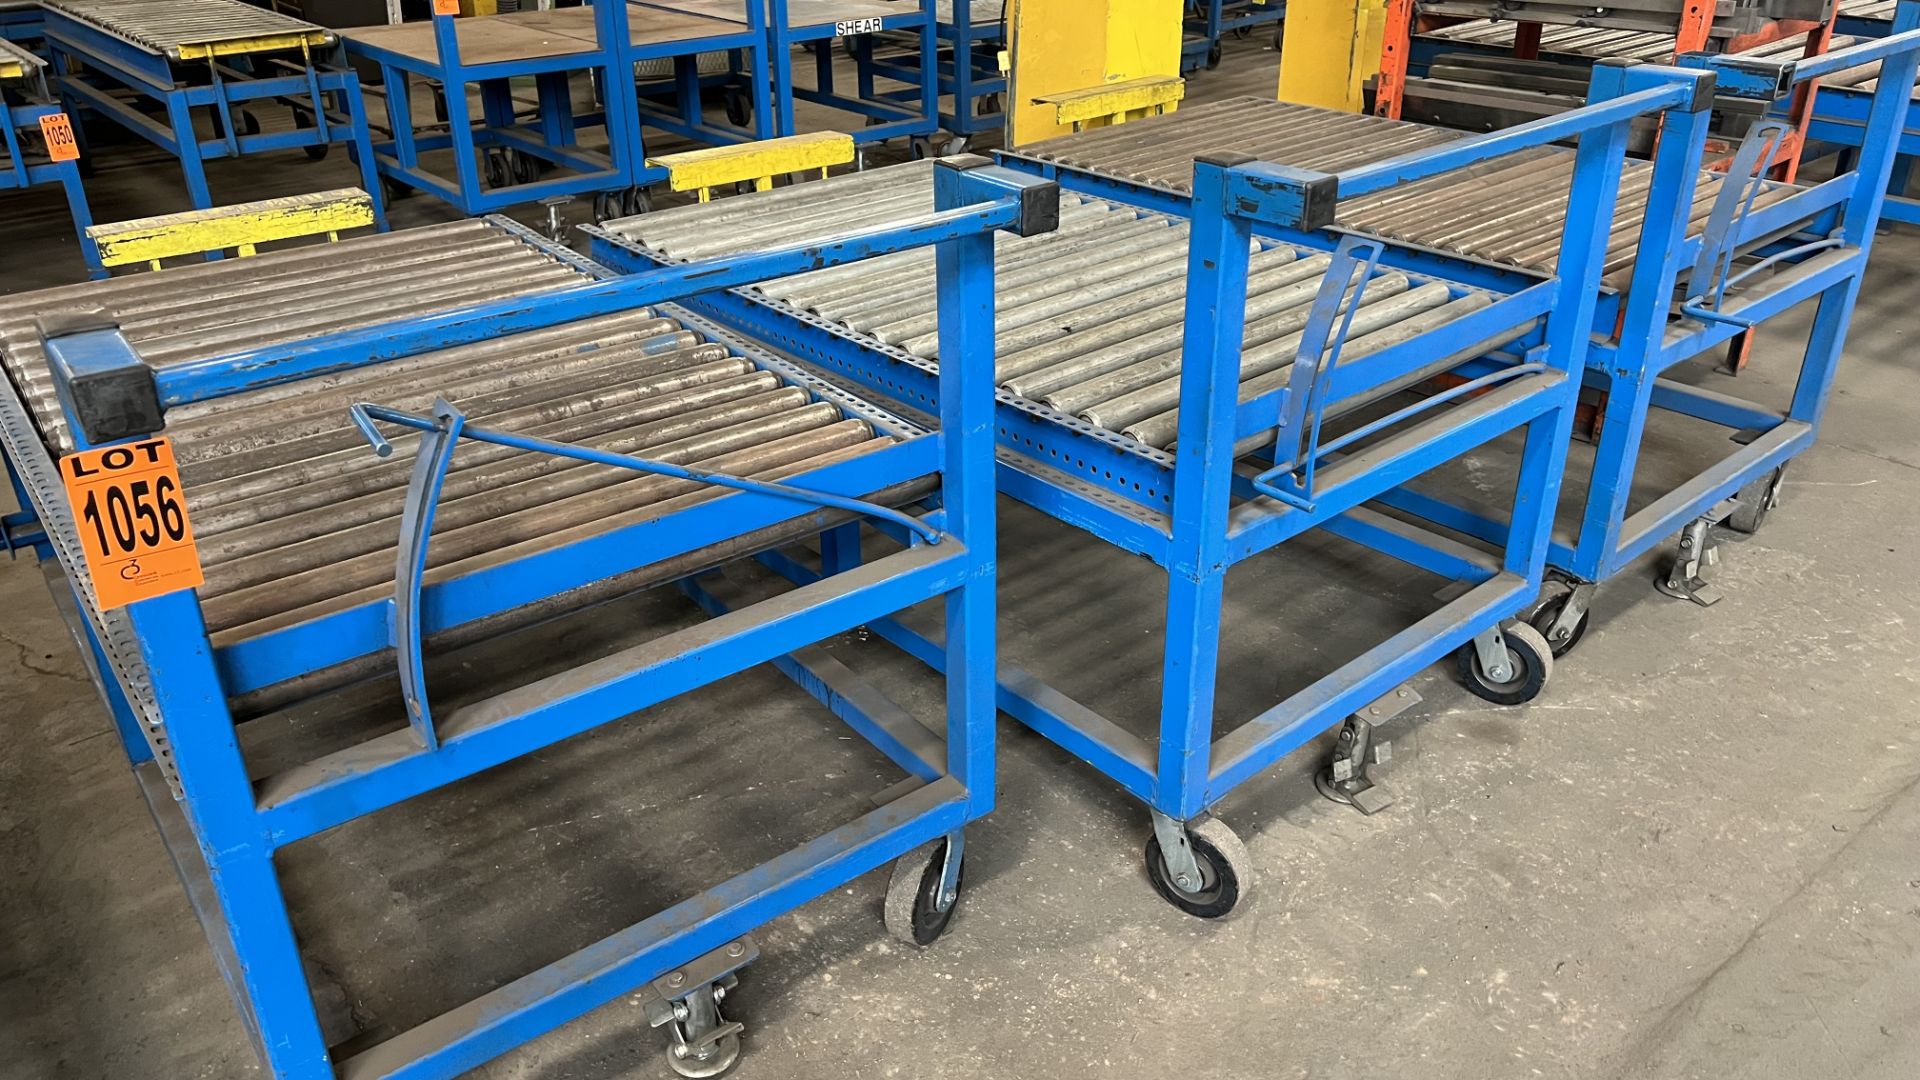 Lot of (3) steel frame manual roller conveyors w/ handles, casters, foot lock and adjustable height